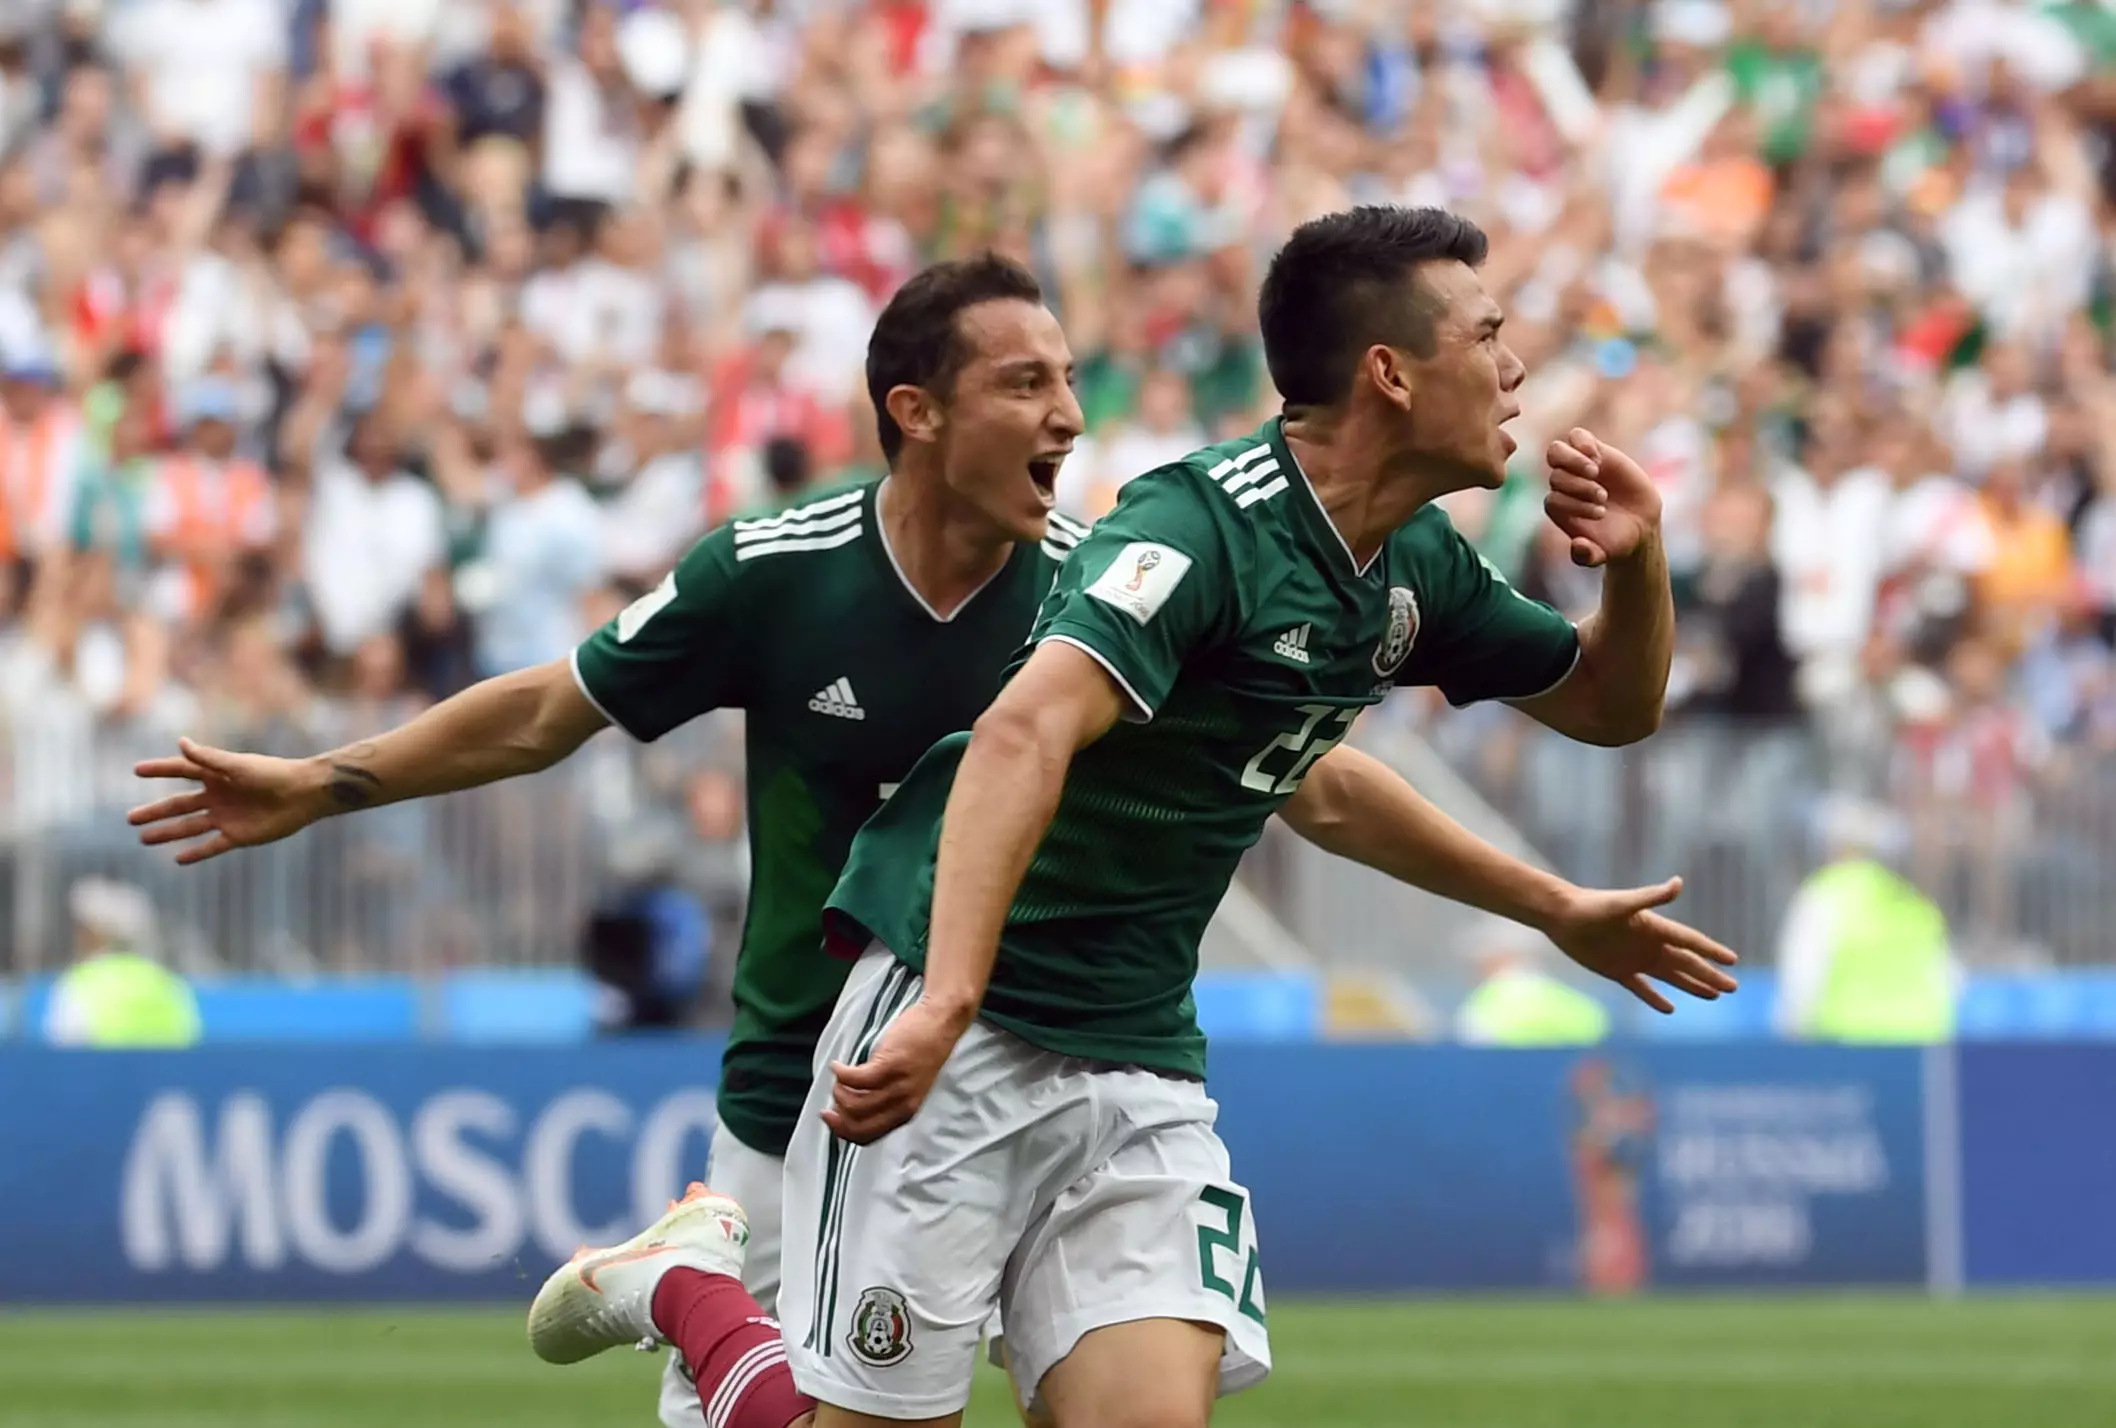 Lots of people turned on by Lozano's goal. Image: PA Images